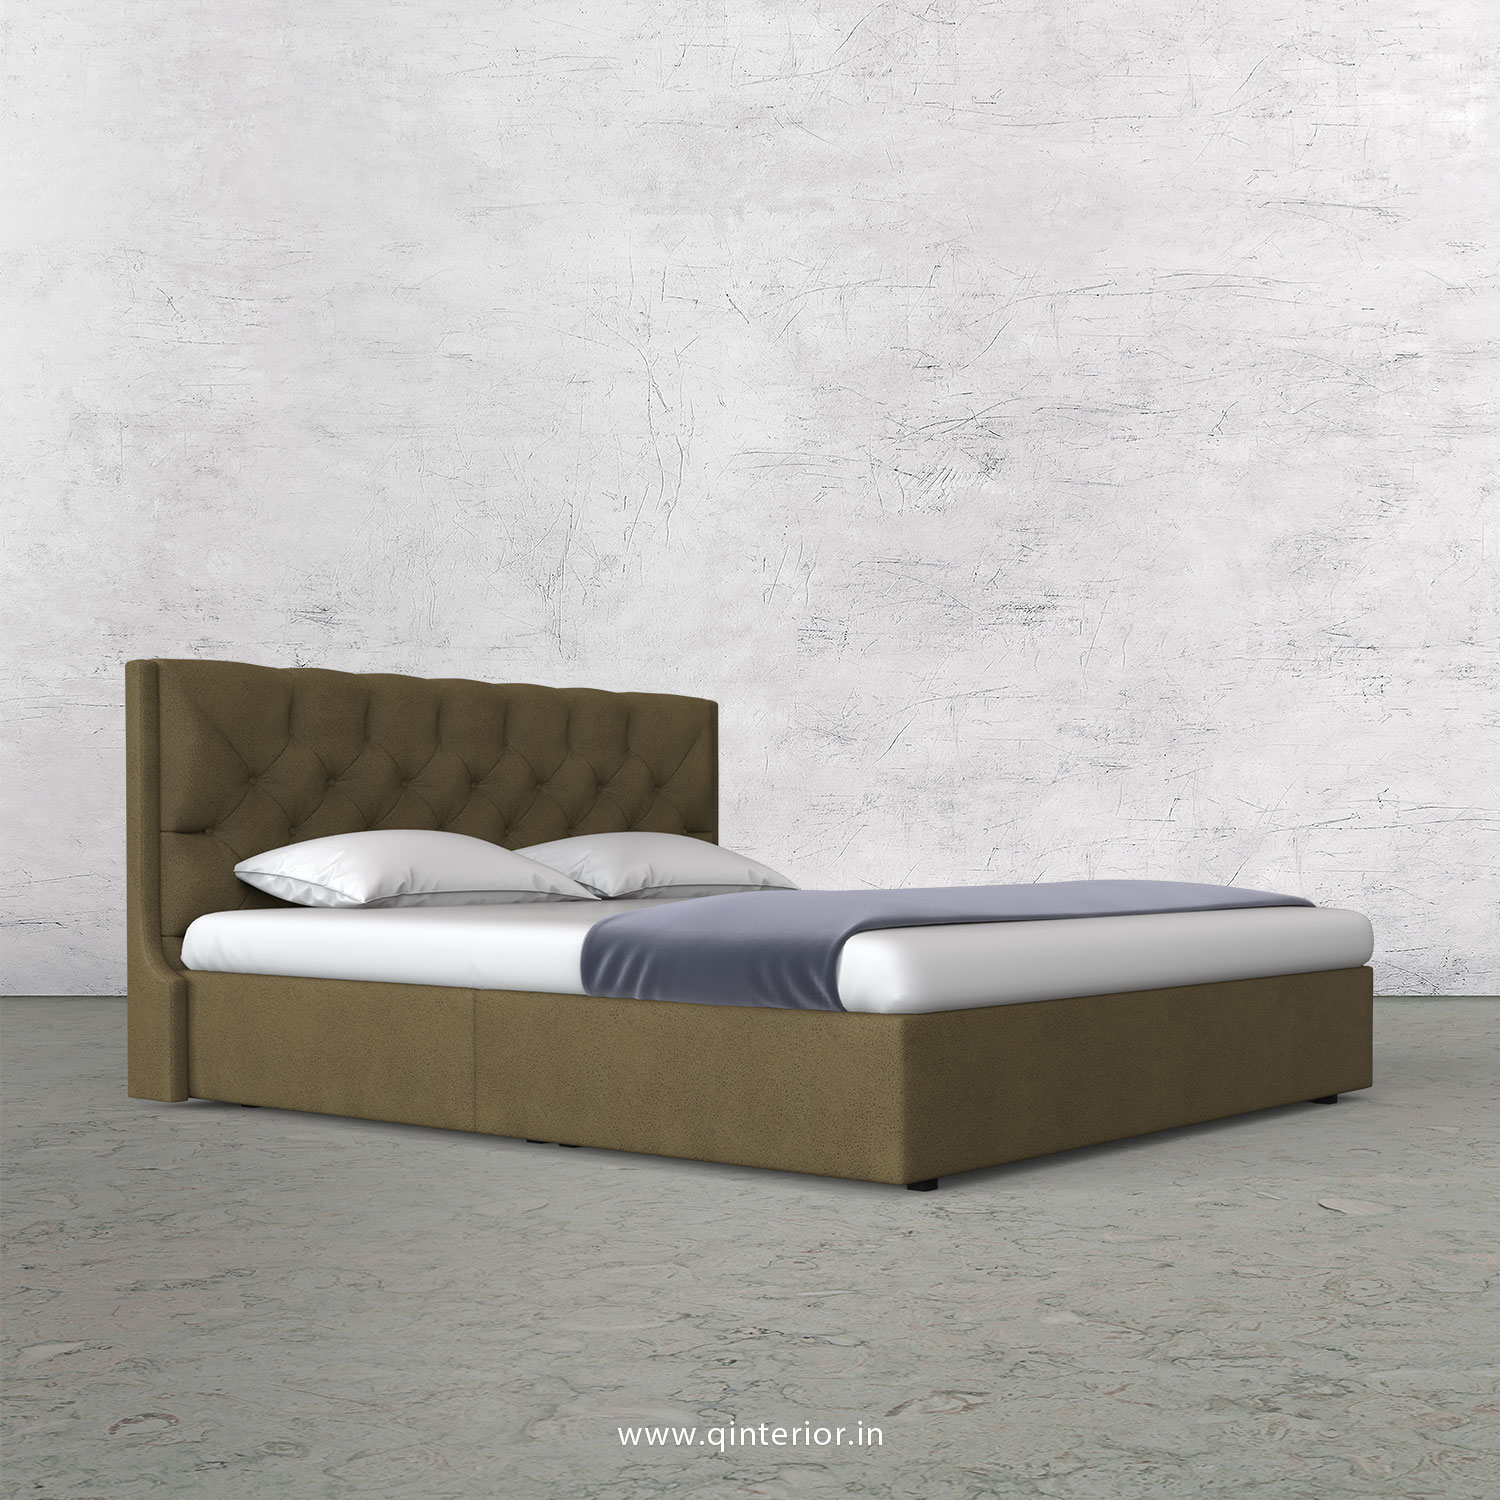 Scorpius King Size Bed in Fab Leather Fabric - KBD009 FL01